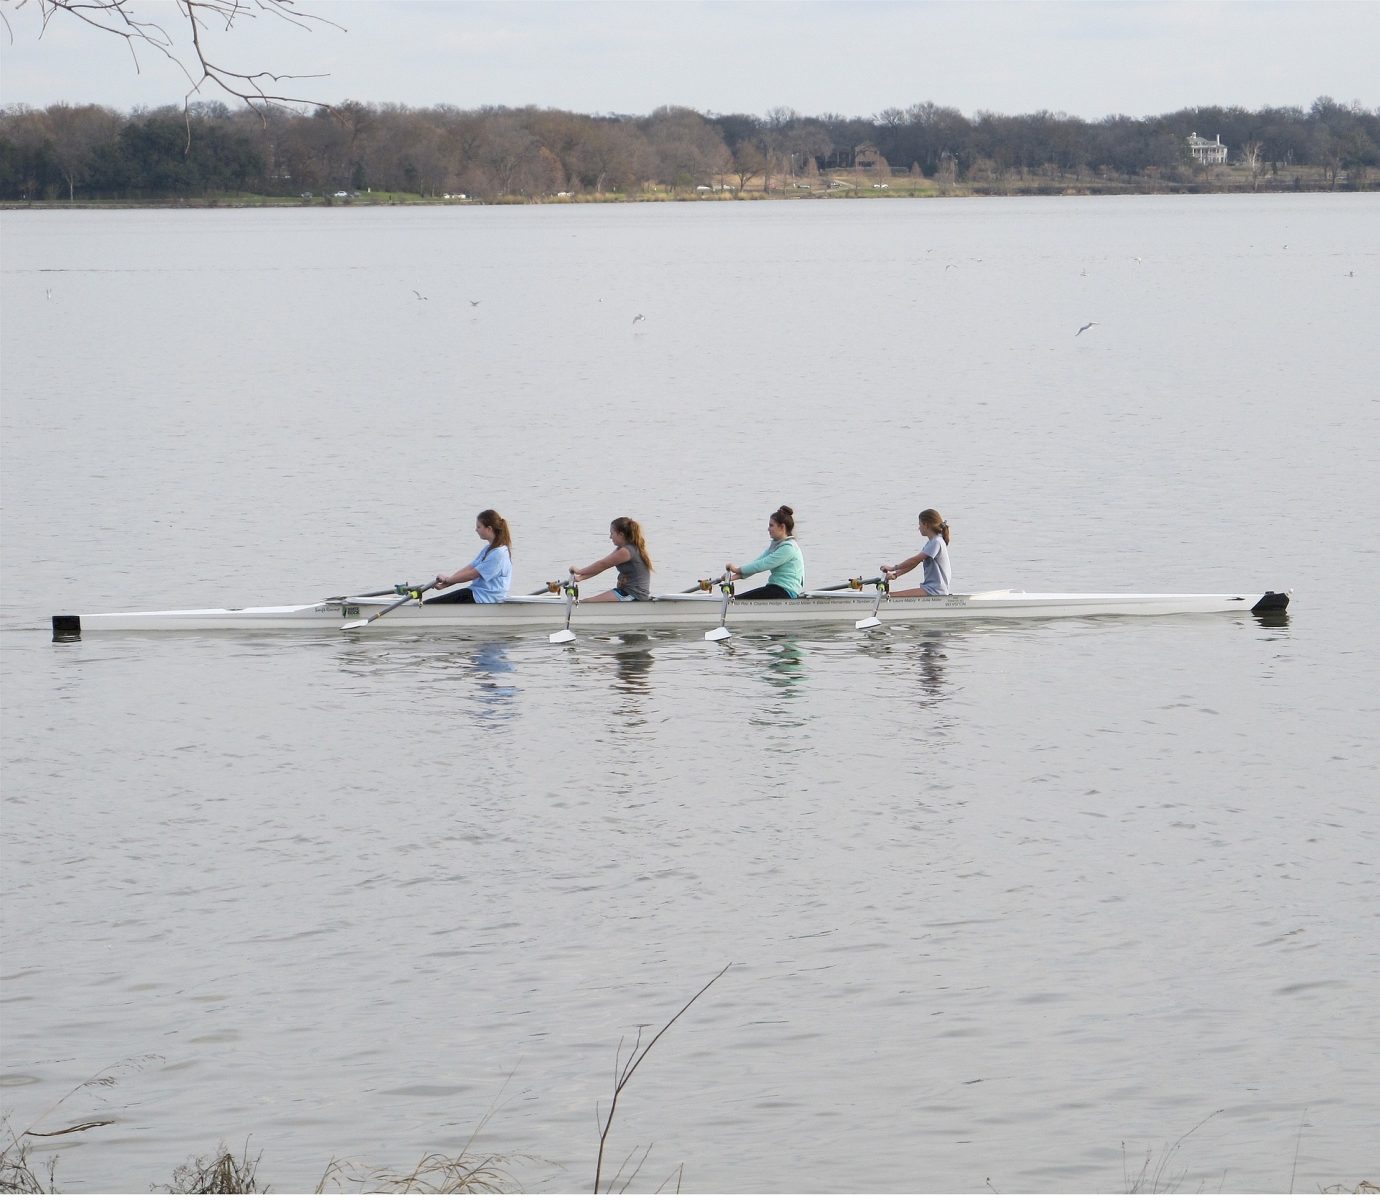 Students rowing team sport